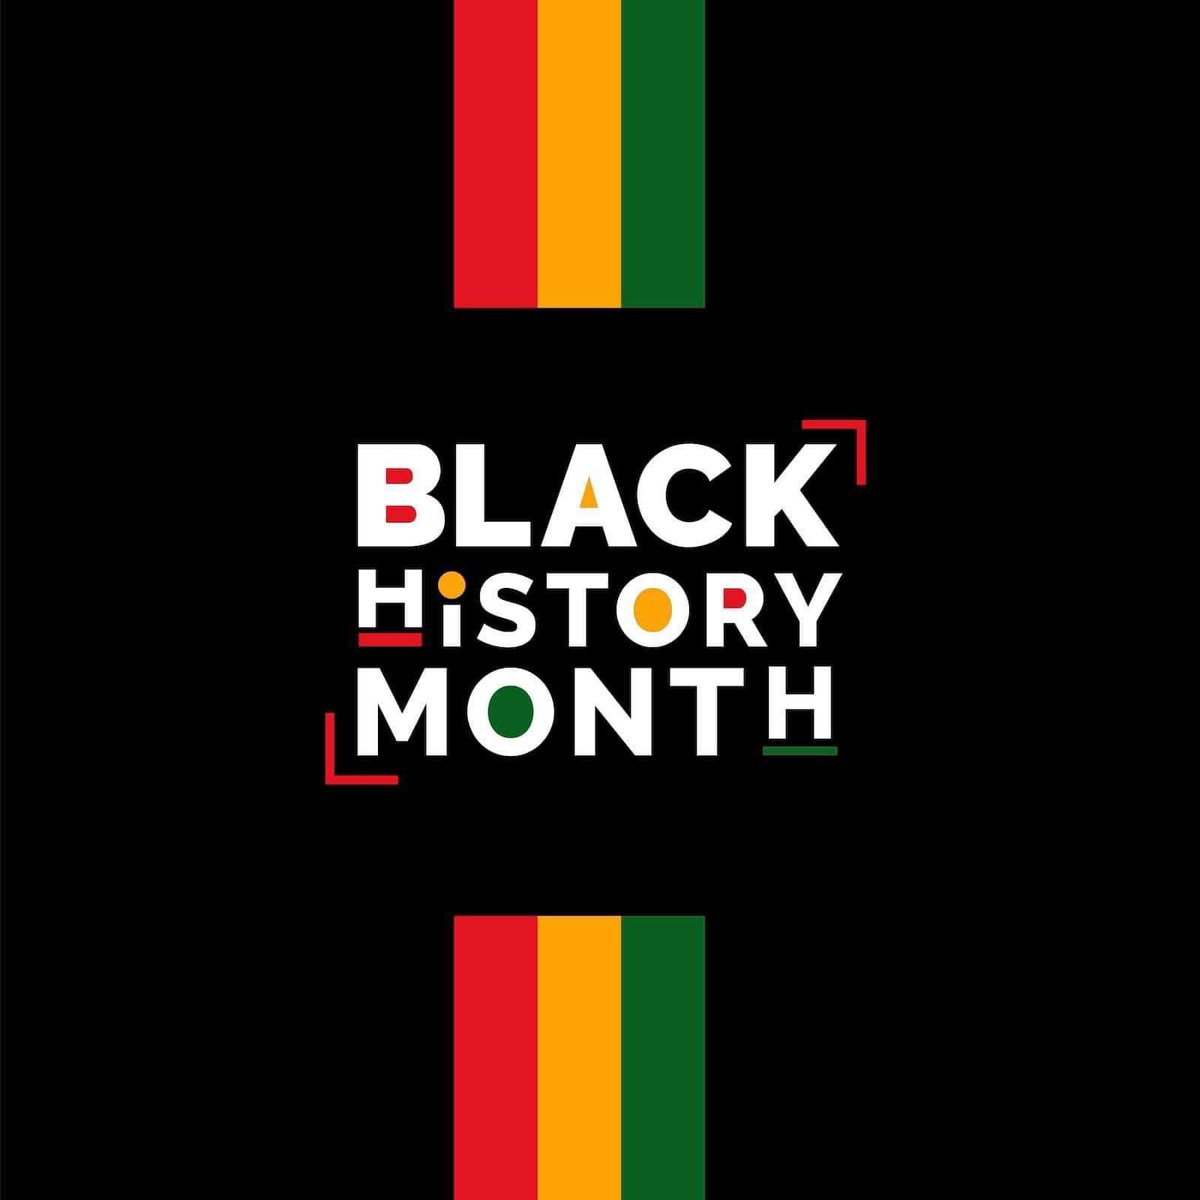 I am black history. ✊🏾 All day, every day—especially this month! #BlackHistoryMonth